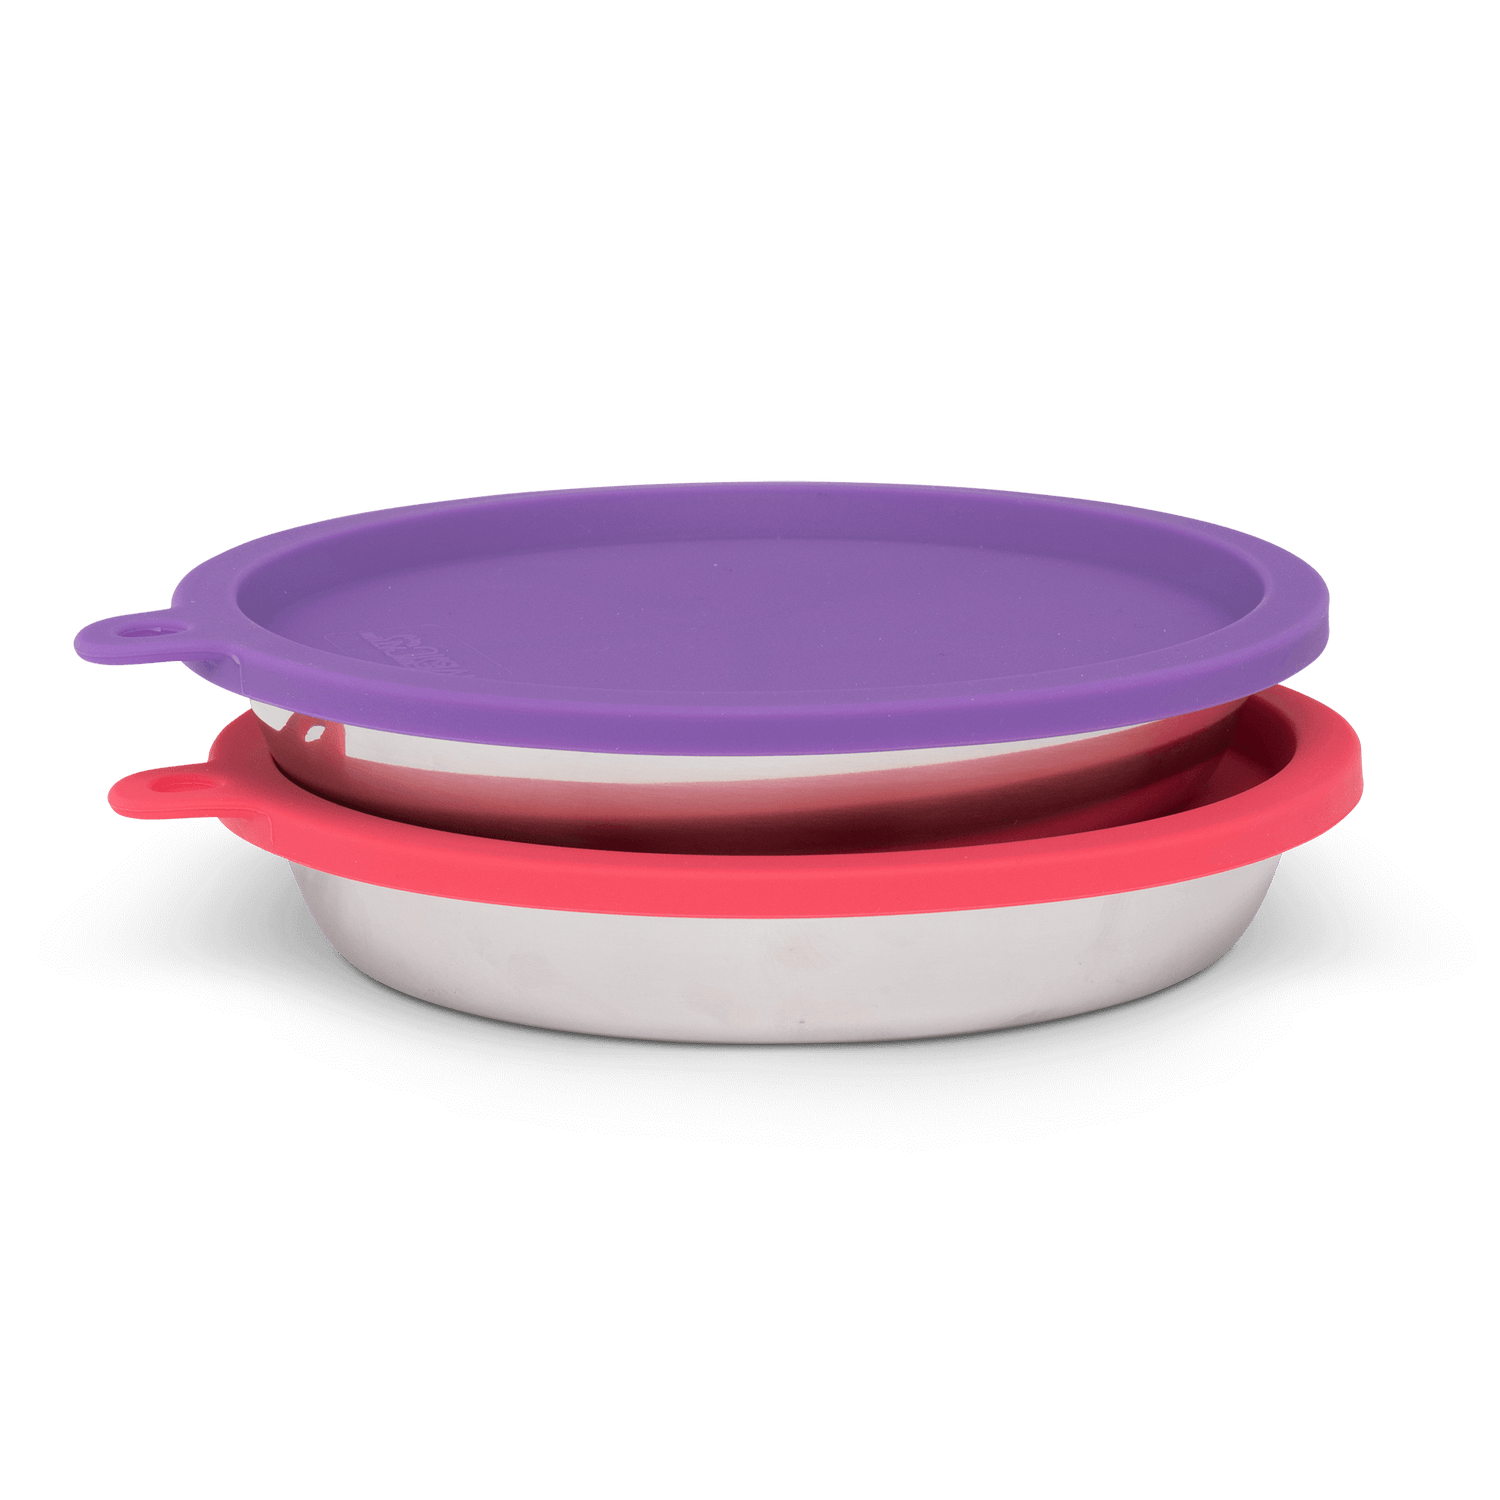 2 piece cat bowl set with lids.  Ideal for cat food storage or food preparation.  Stainless steel bowls and sillicone lids.  Lid colours are purple and watermelon.